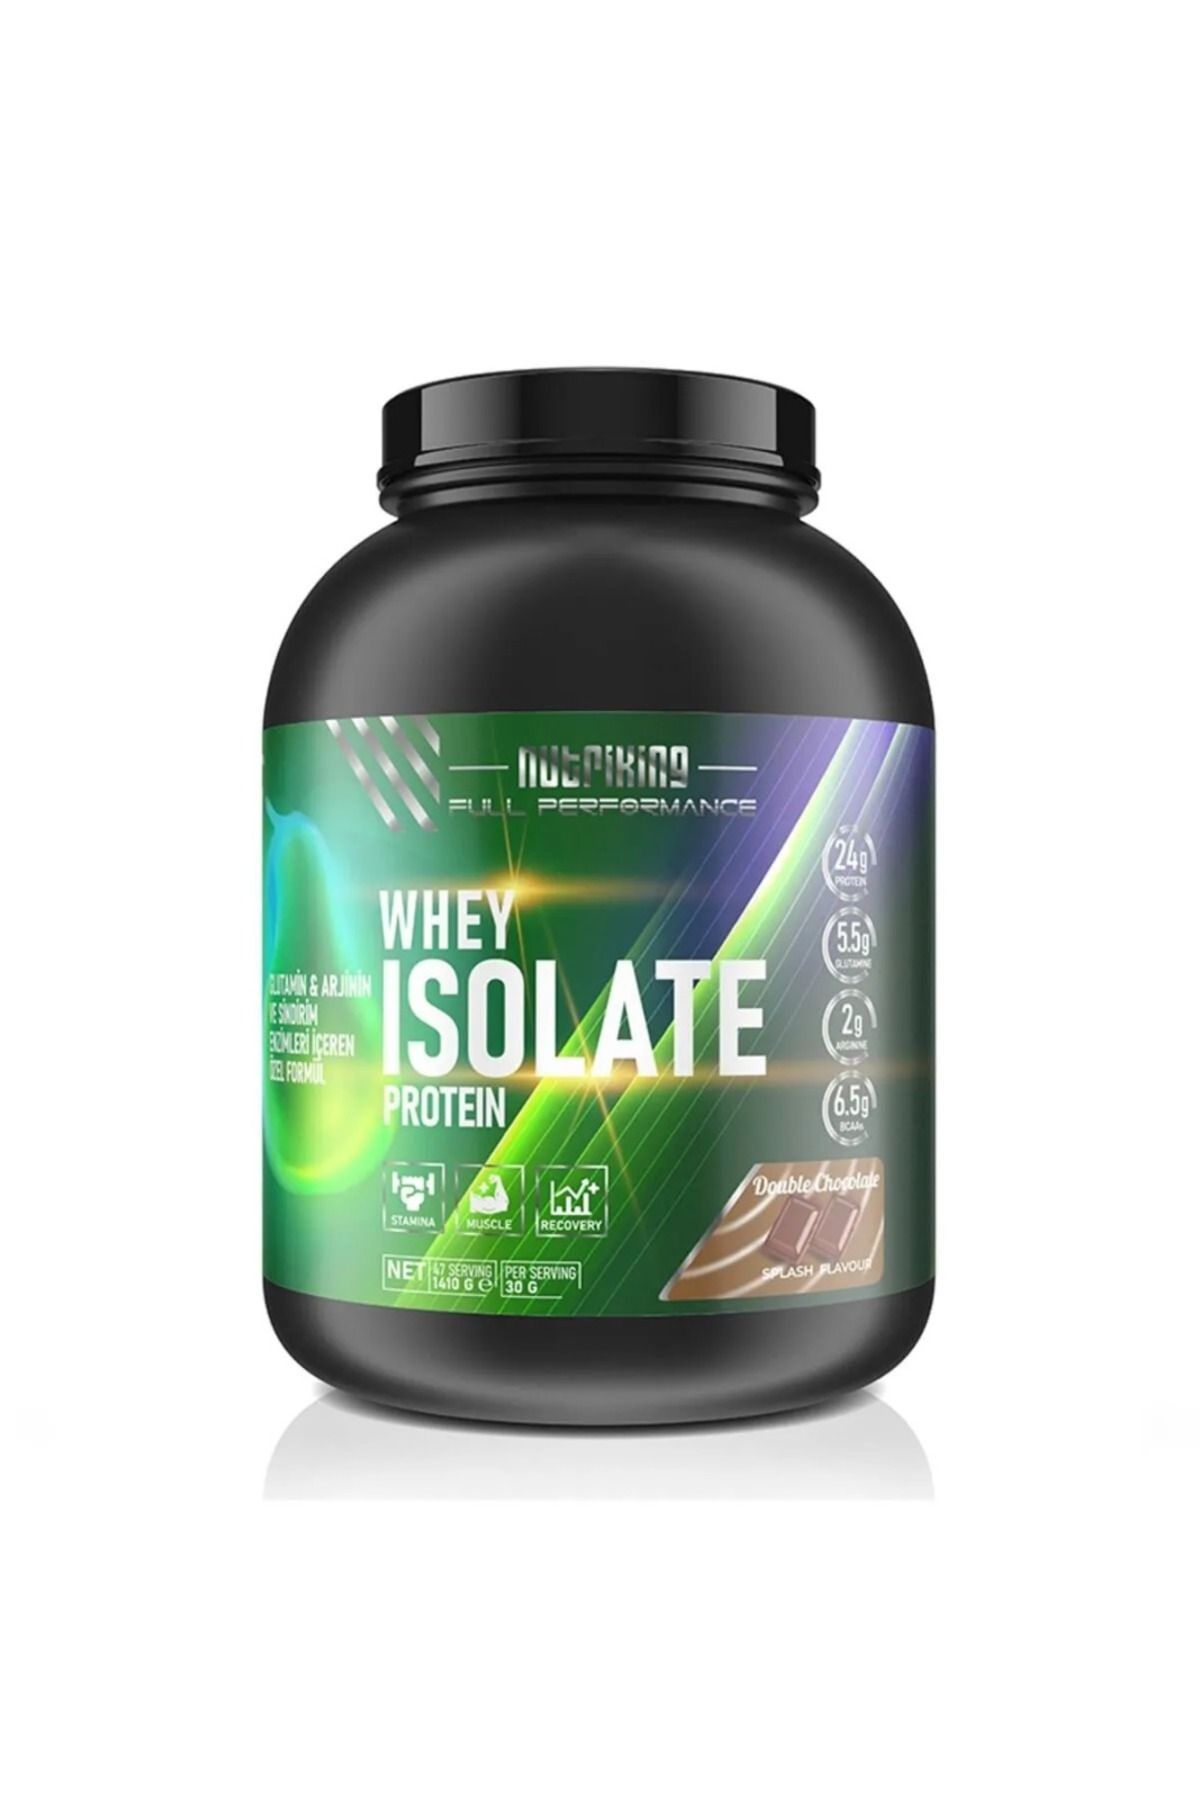 Nutriking Whey Isolate Protein 1410 Gr